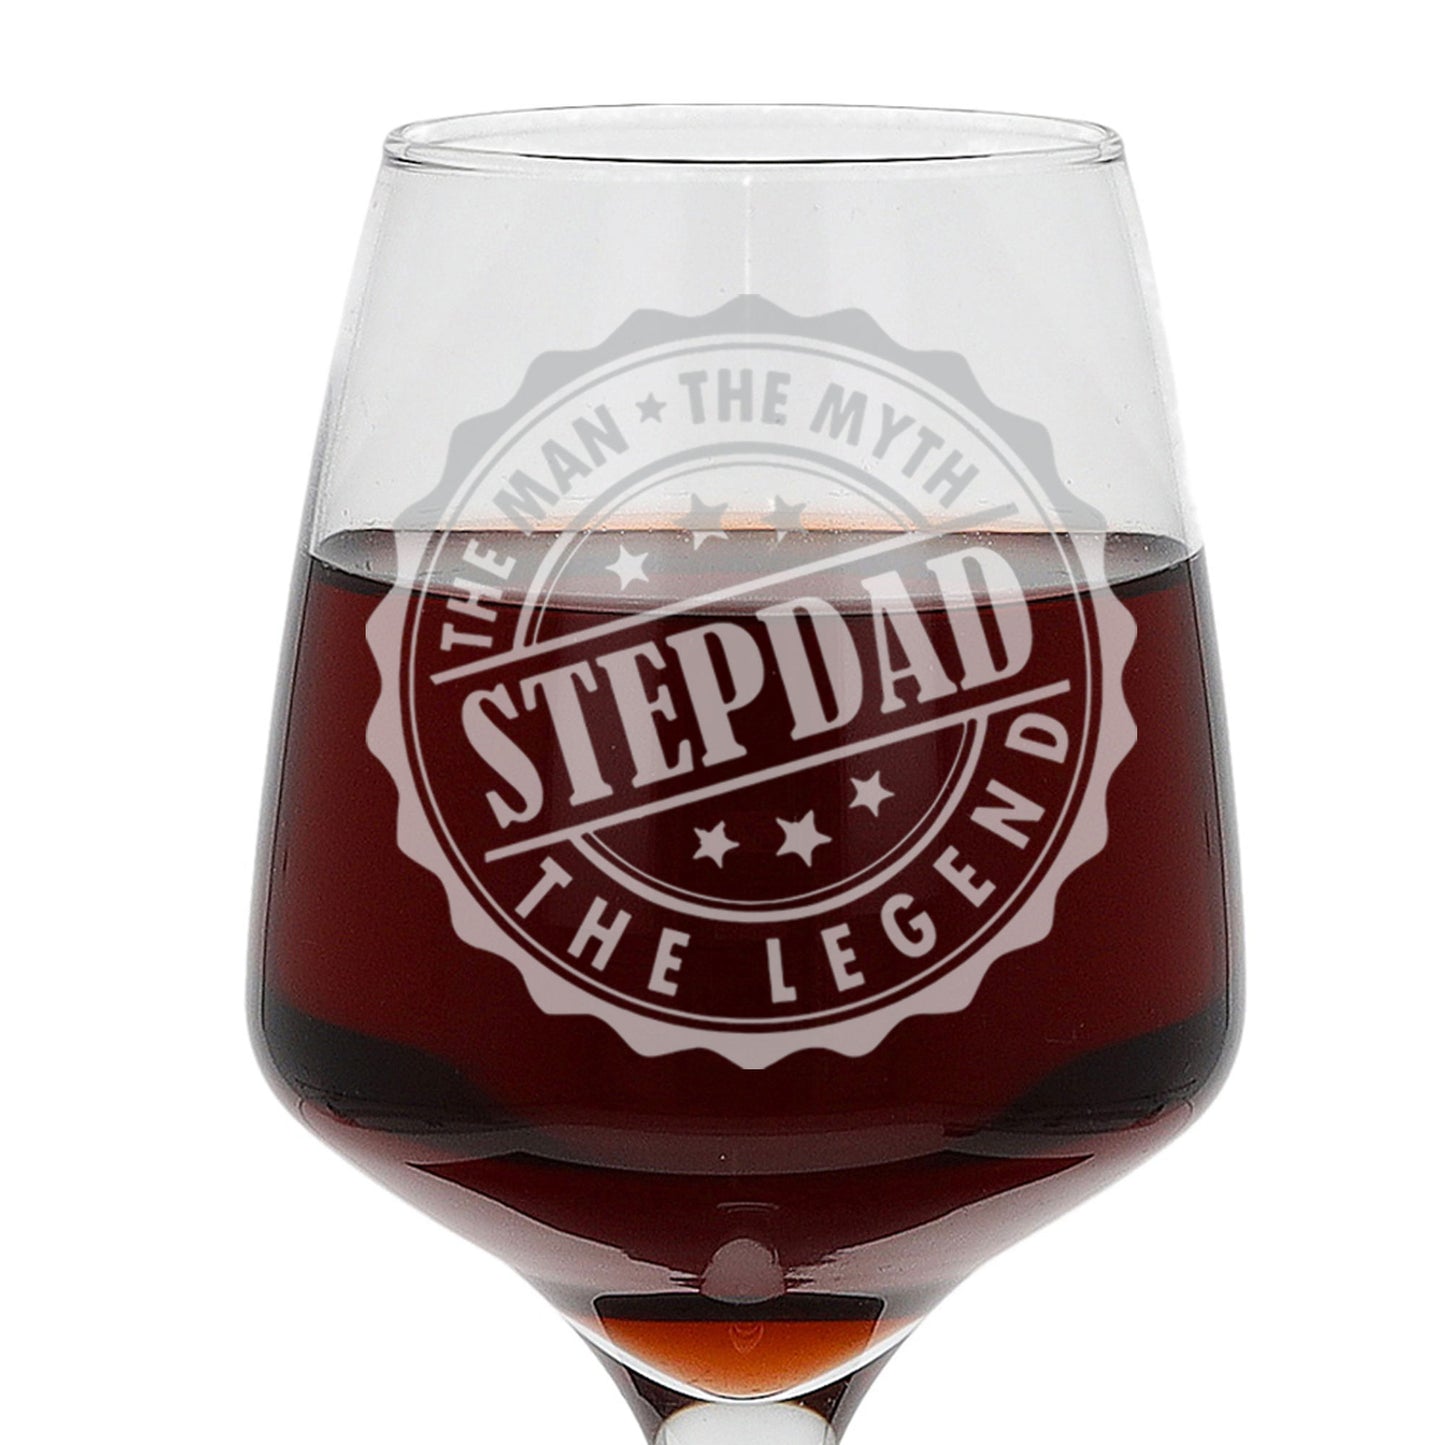 Step Dad The Man The Myth The Legend Engraved Wine Glass and/or Coaster Set  - Always Looking Good -   